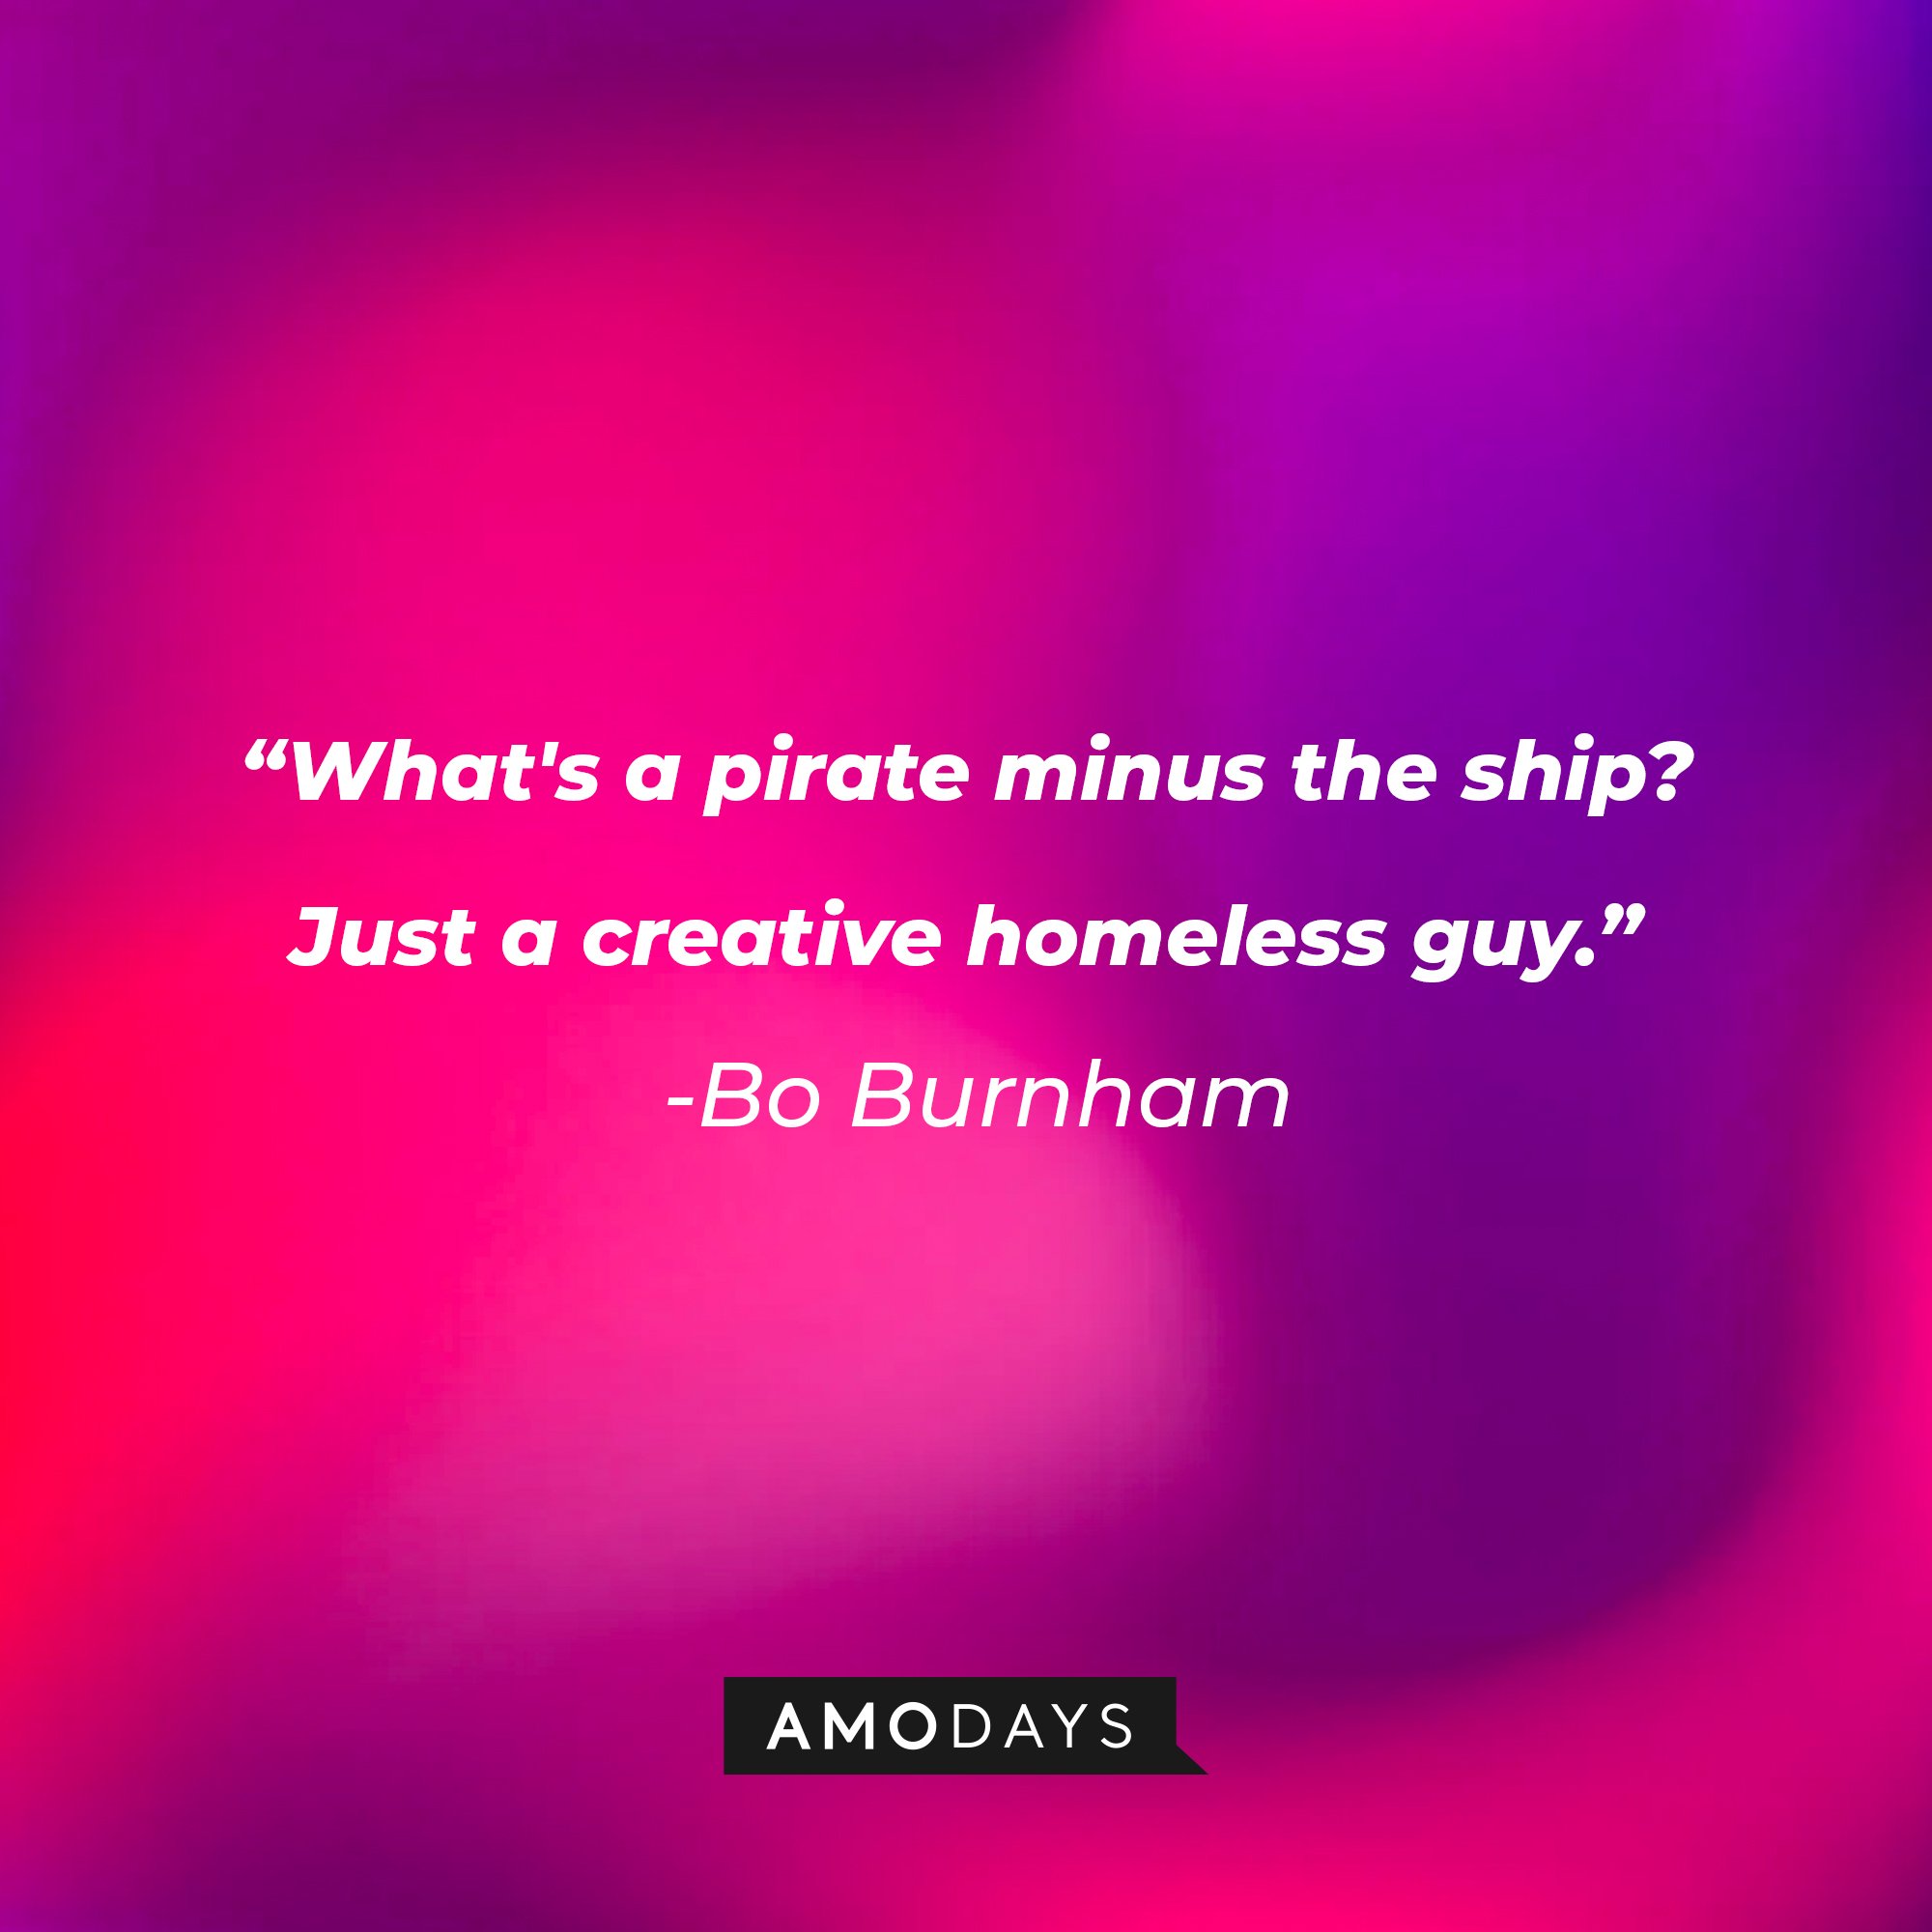 Bo Burnham’s quote: "What's a pirate minus the ship? Just a creative homeless guy."  | Image: AmoDays